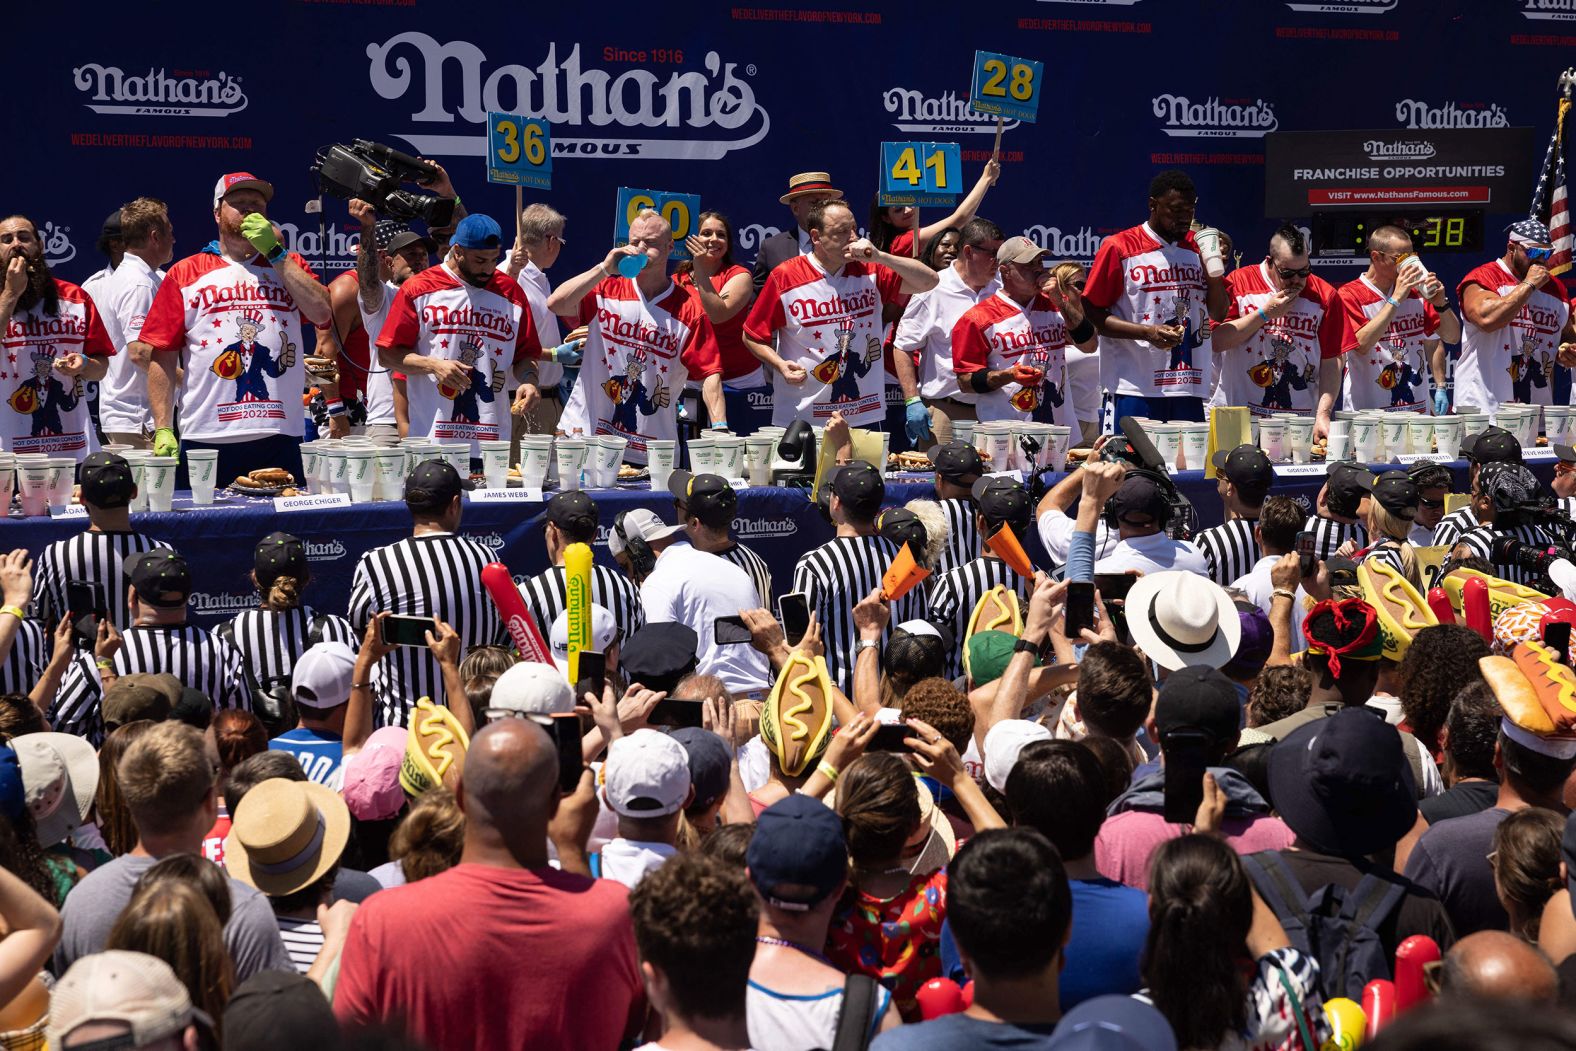 Competitive eaters take part in the annual Nathan's Hot Dog Eating Contest in New York on Monday. <a href="https://www.cnn.com/2022/07/04/us/nathans-hot-dog-contest-winner/index.html" target="_blank">Joey Chestnut devoured 63 hot dogs and buns in 10 minutes</a> to win the event for the 15th time in 16 years.